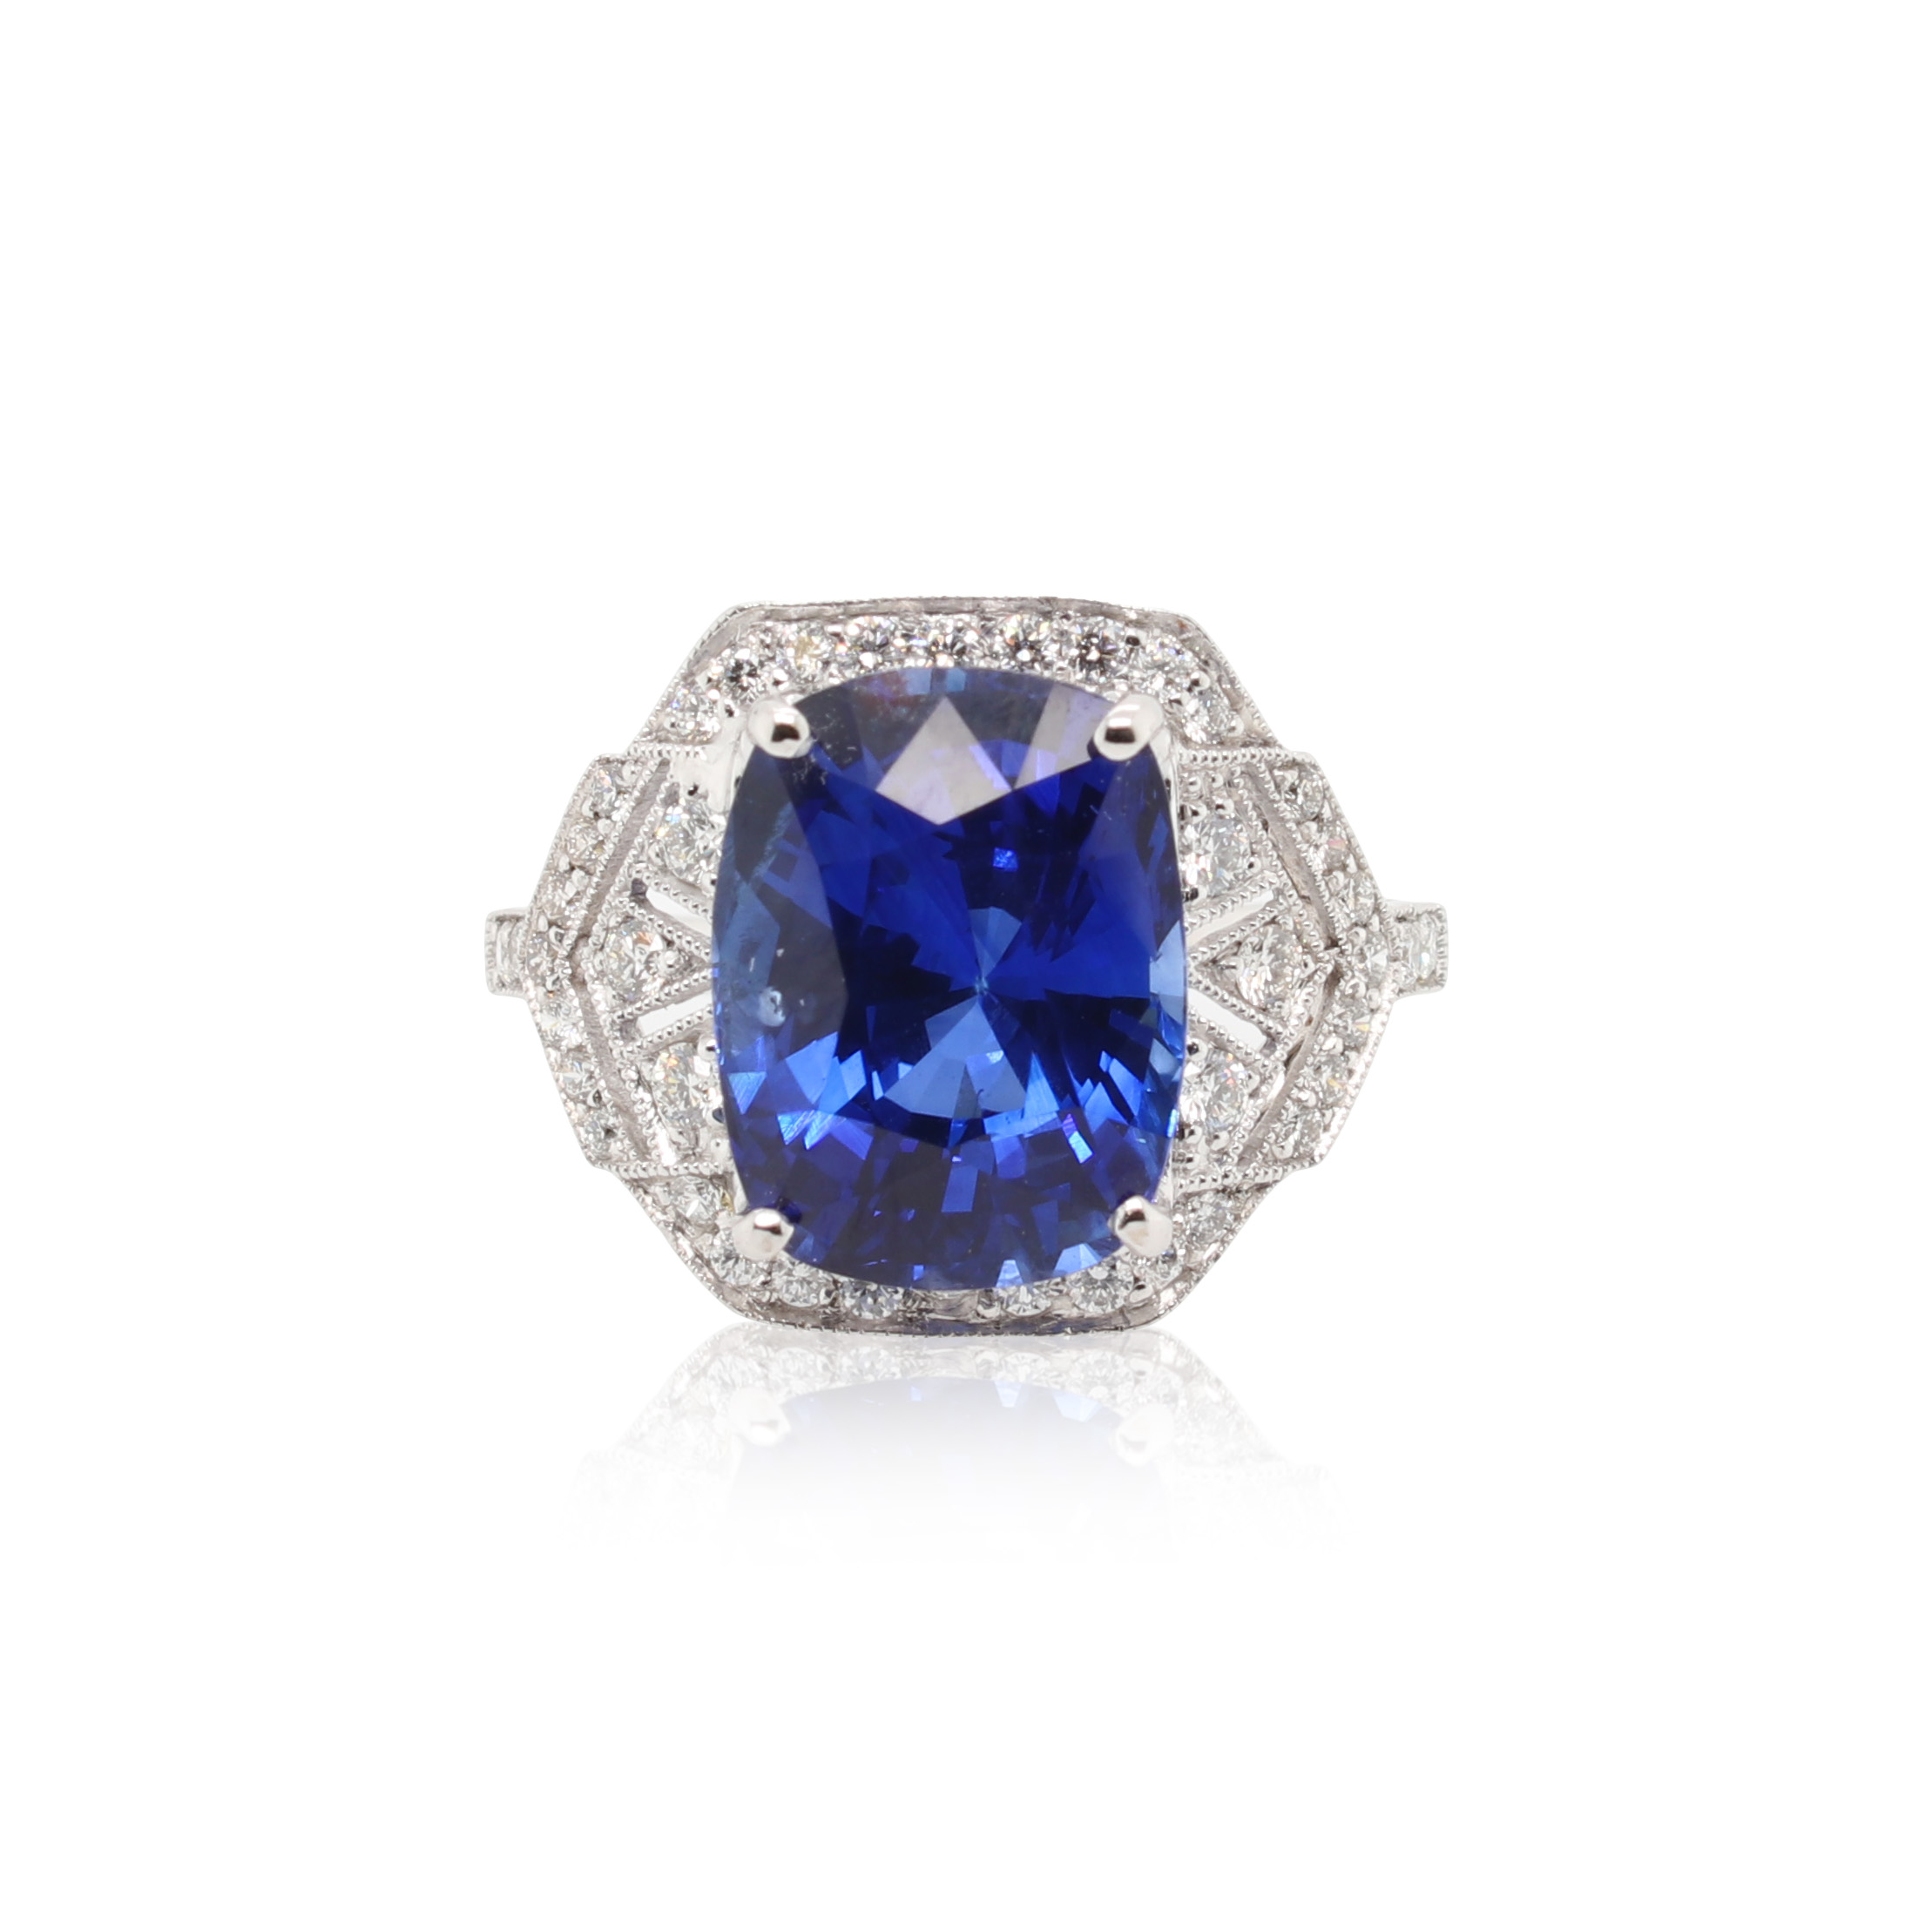 This ring is crafted from platinum and features a 7.19 carat sapphire and 0.98 total carats of diamonds along the sides and around the halo.